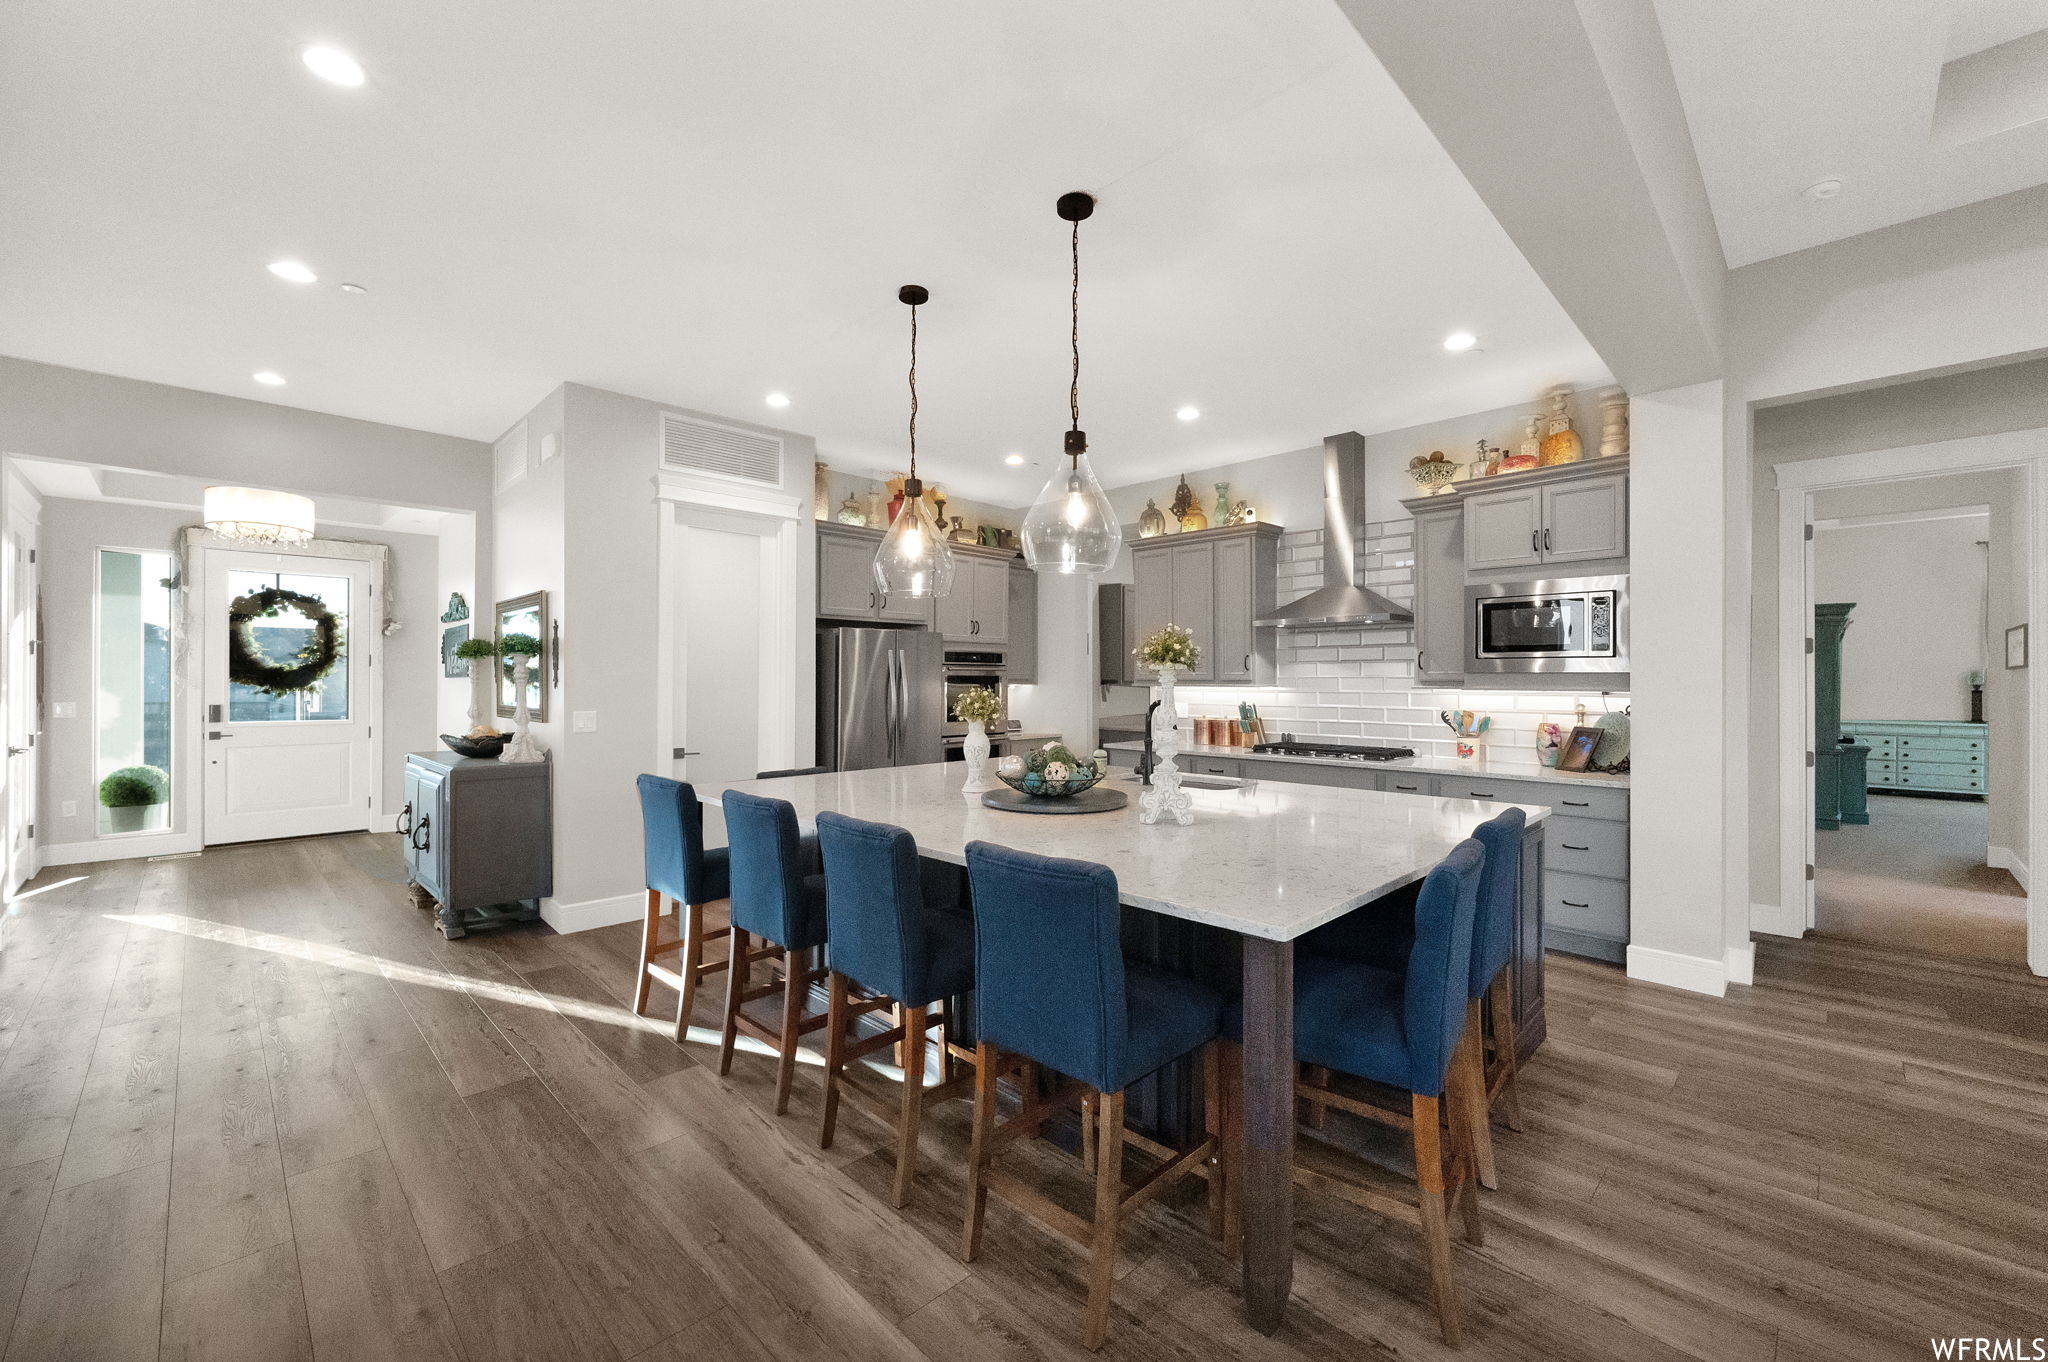 Kitchen featuring stainless steel appliances, backsplash, dark hardwood floors, a center island, pendant lighting, white cabinets, light countertops, kitchen island with sink, and wall chimney exhaust hood